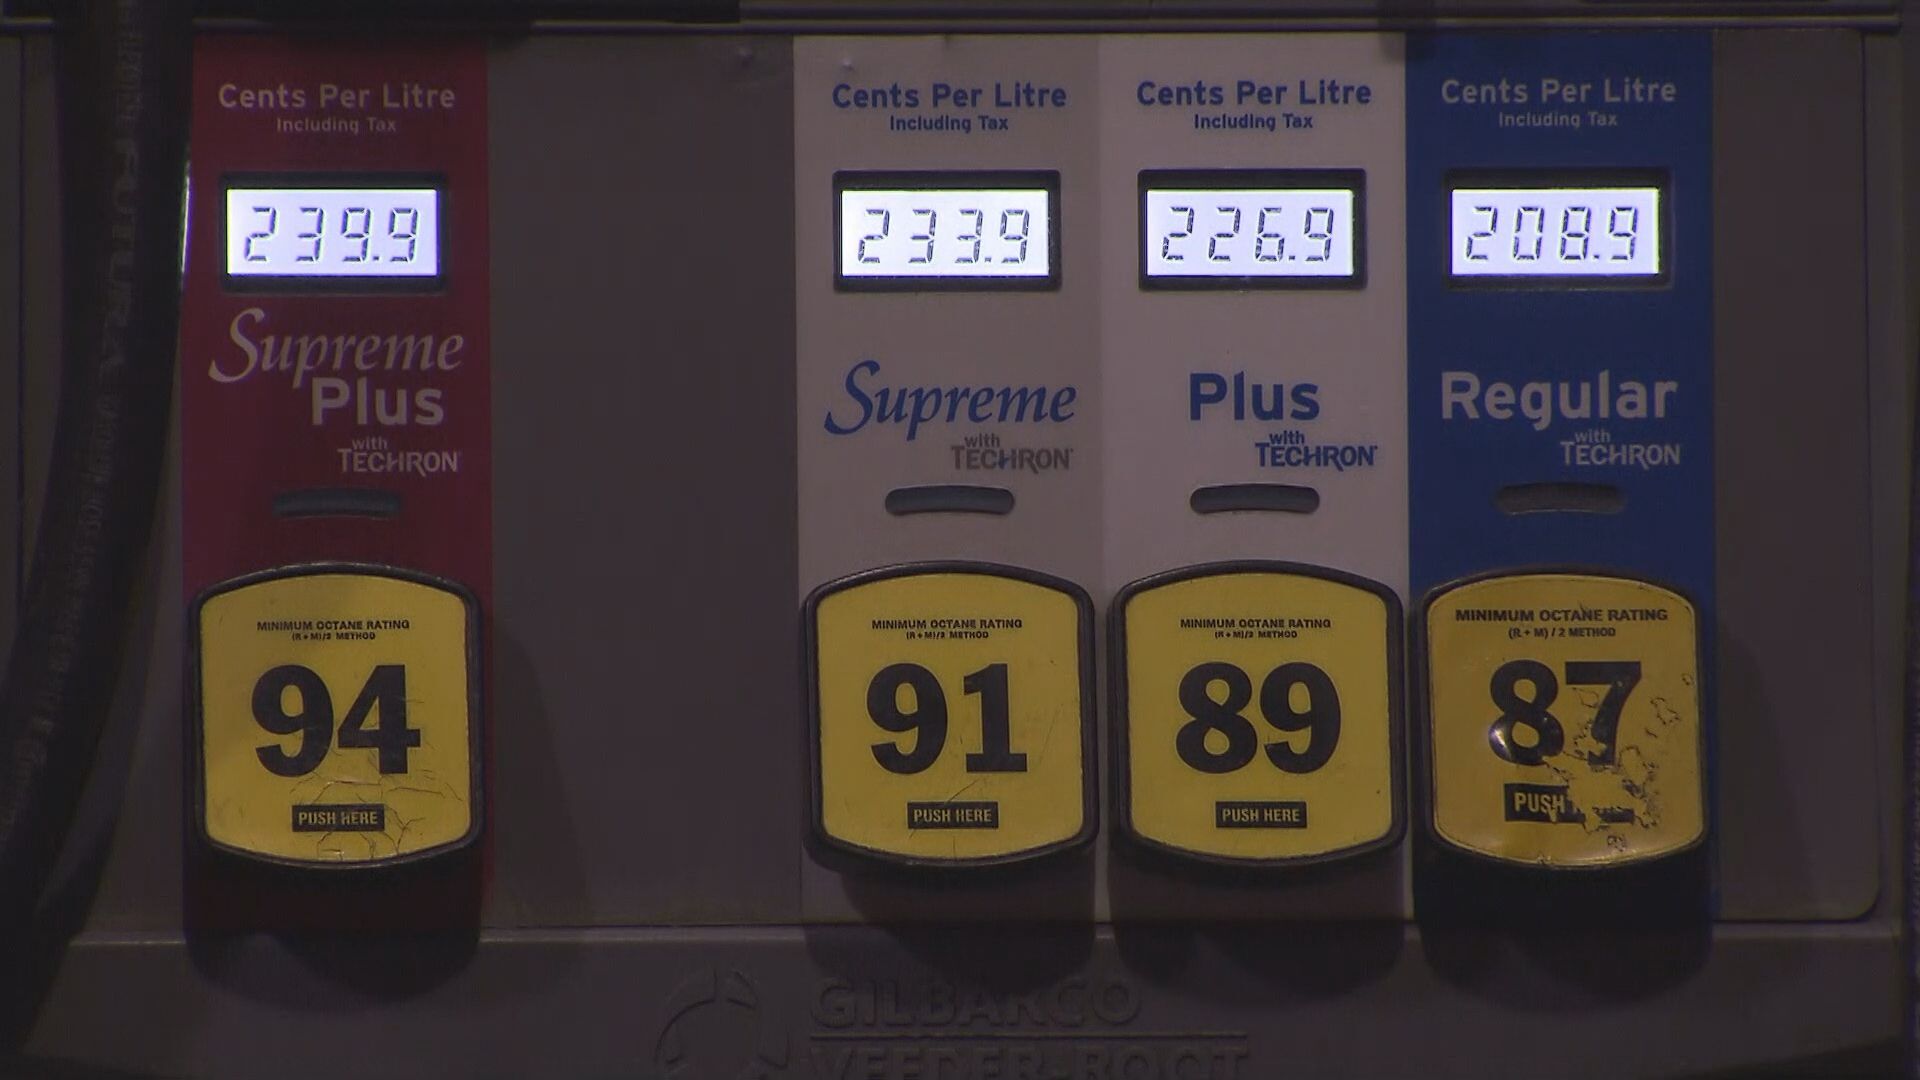 Albertans hit with double gas tax hike